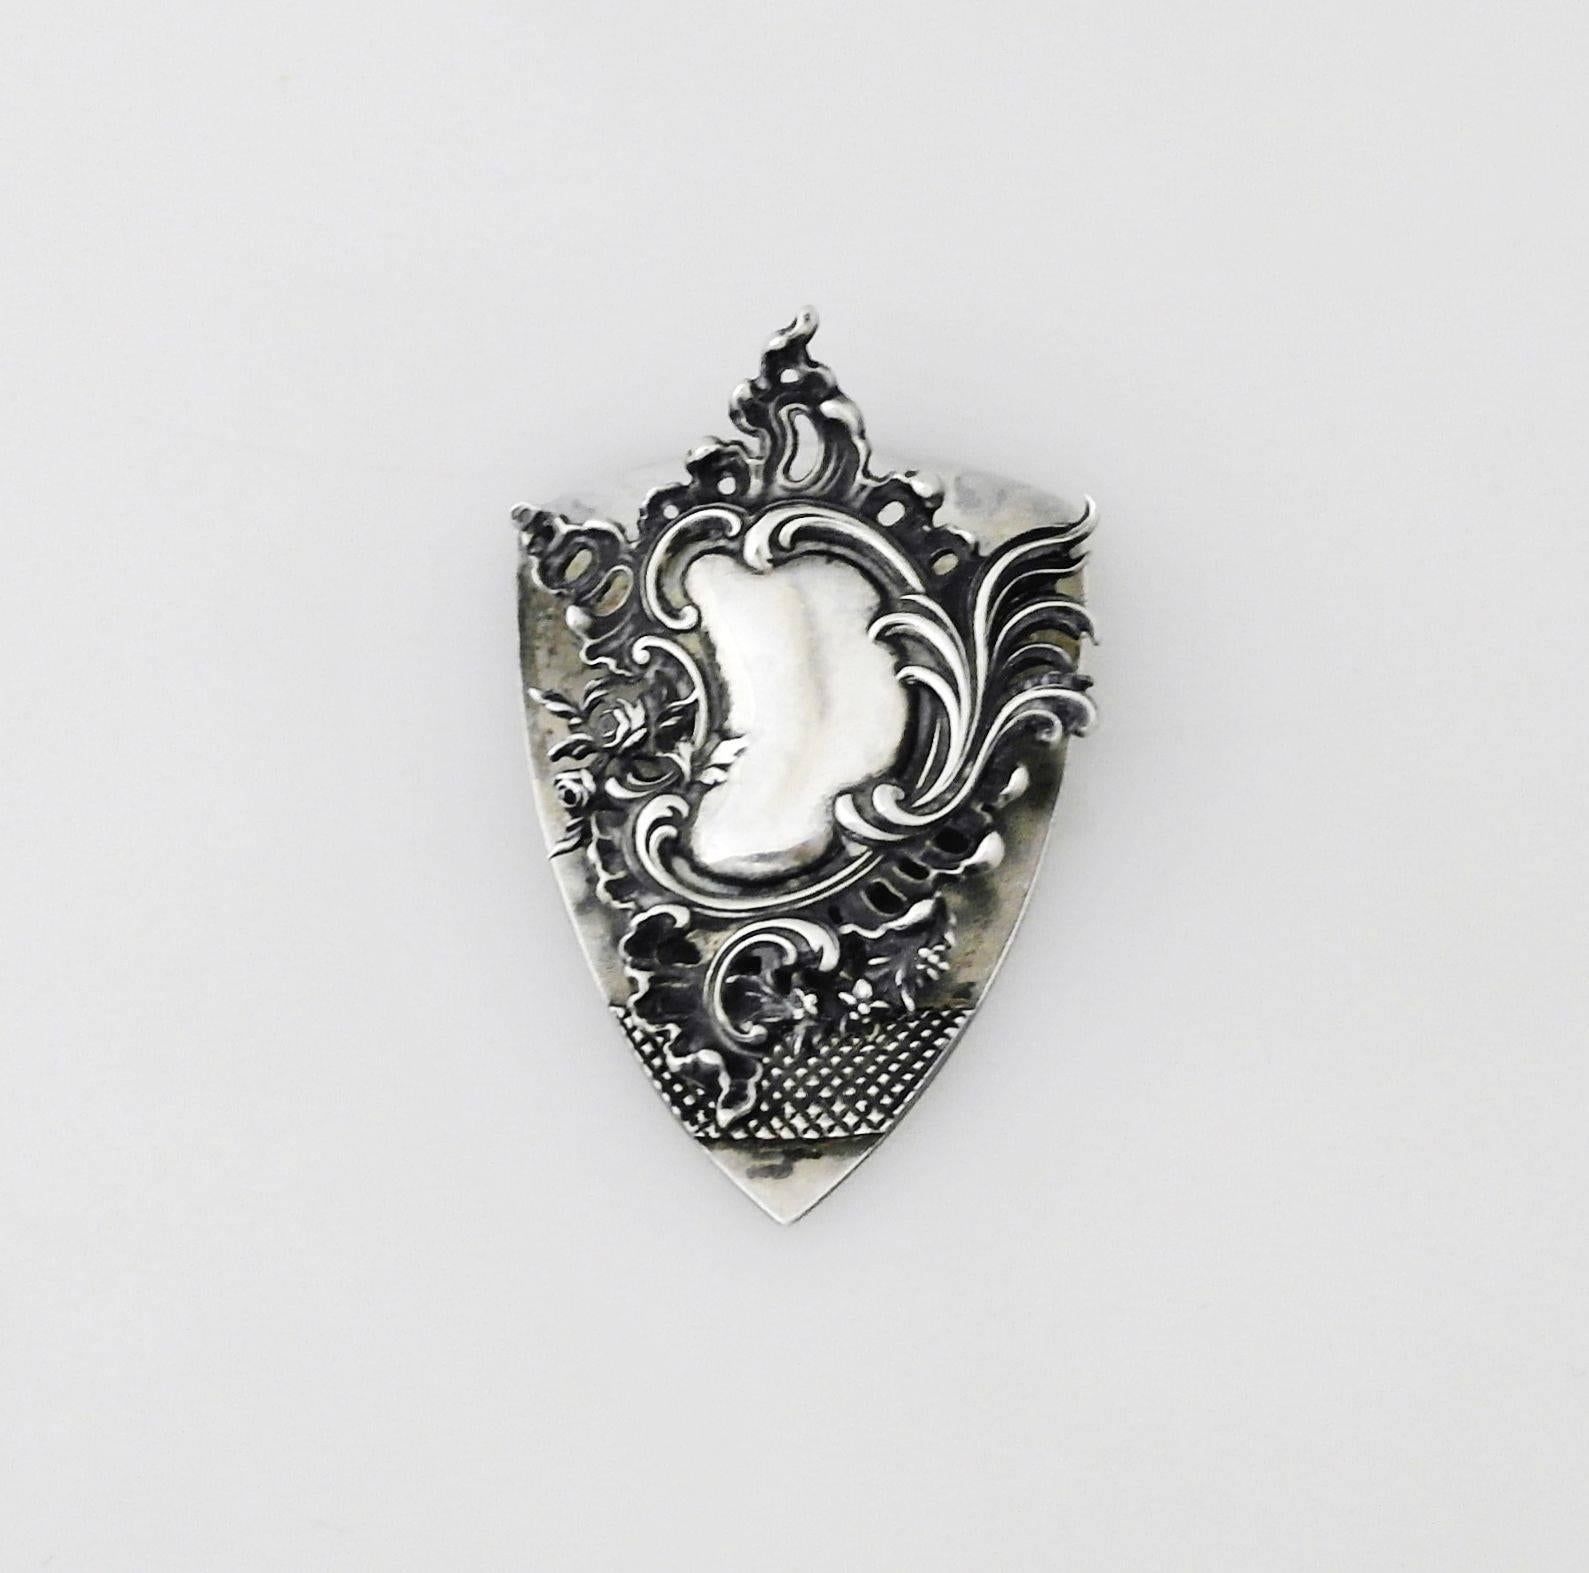 Being offered is a fine sterling silver document clip by George Shiebler of New York; crest shaped with floral and multiple scroll motifs on the clip; superb detail. Dimensions: 2 1/2